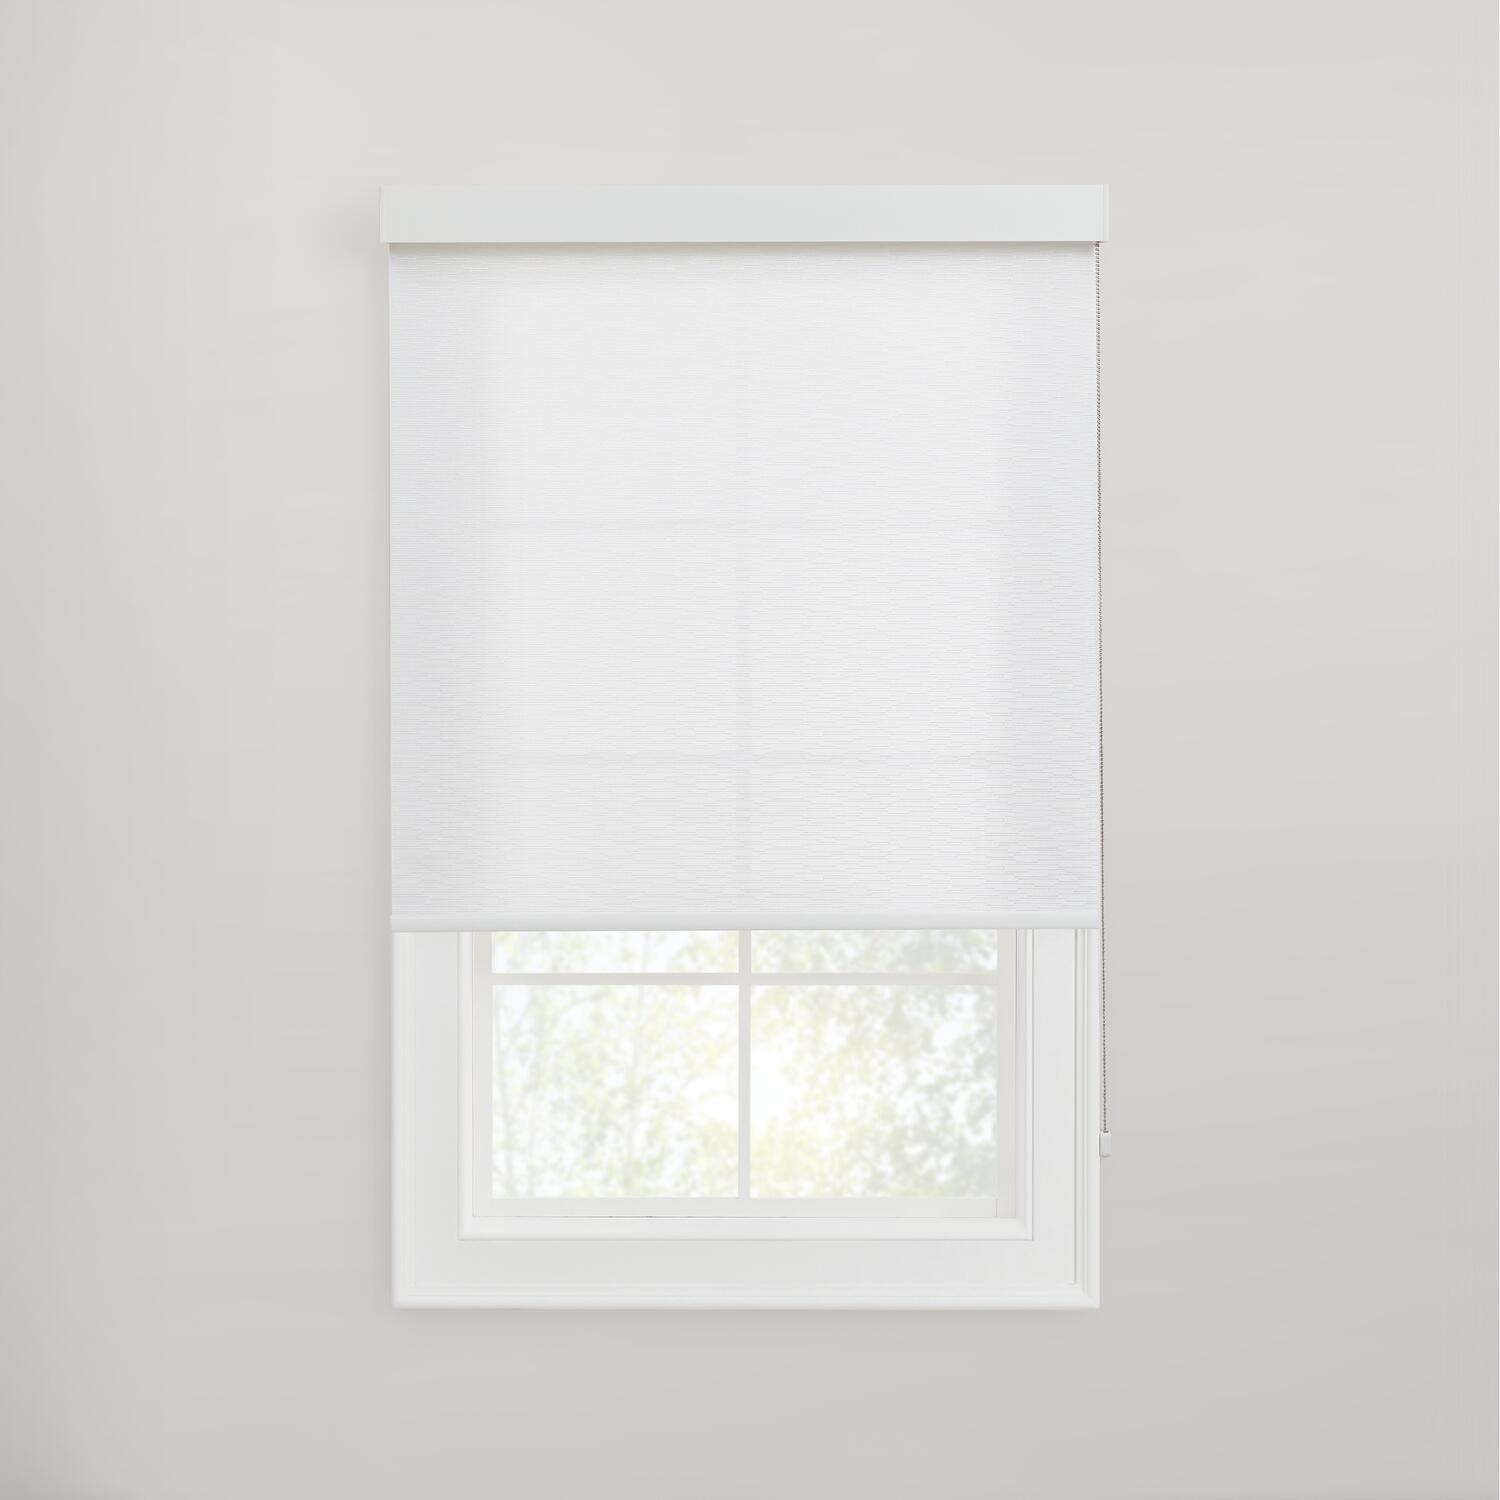 Roller Shade 3% Openness "Chalk" Color  Blind Home Window Custom Made In Canada 